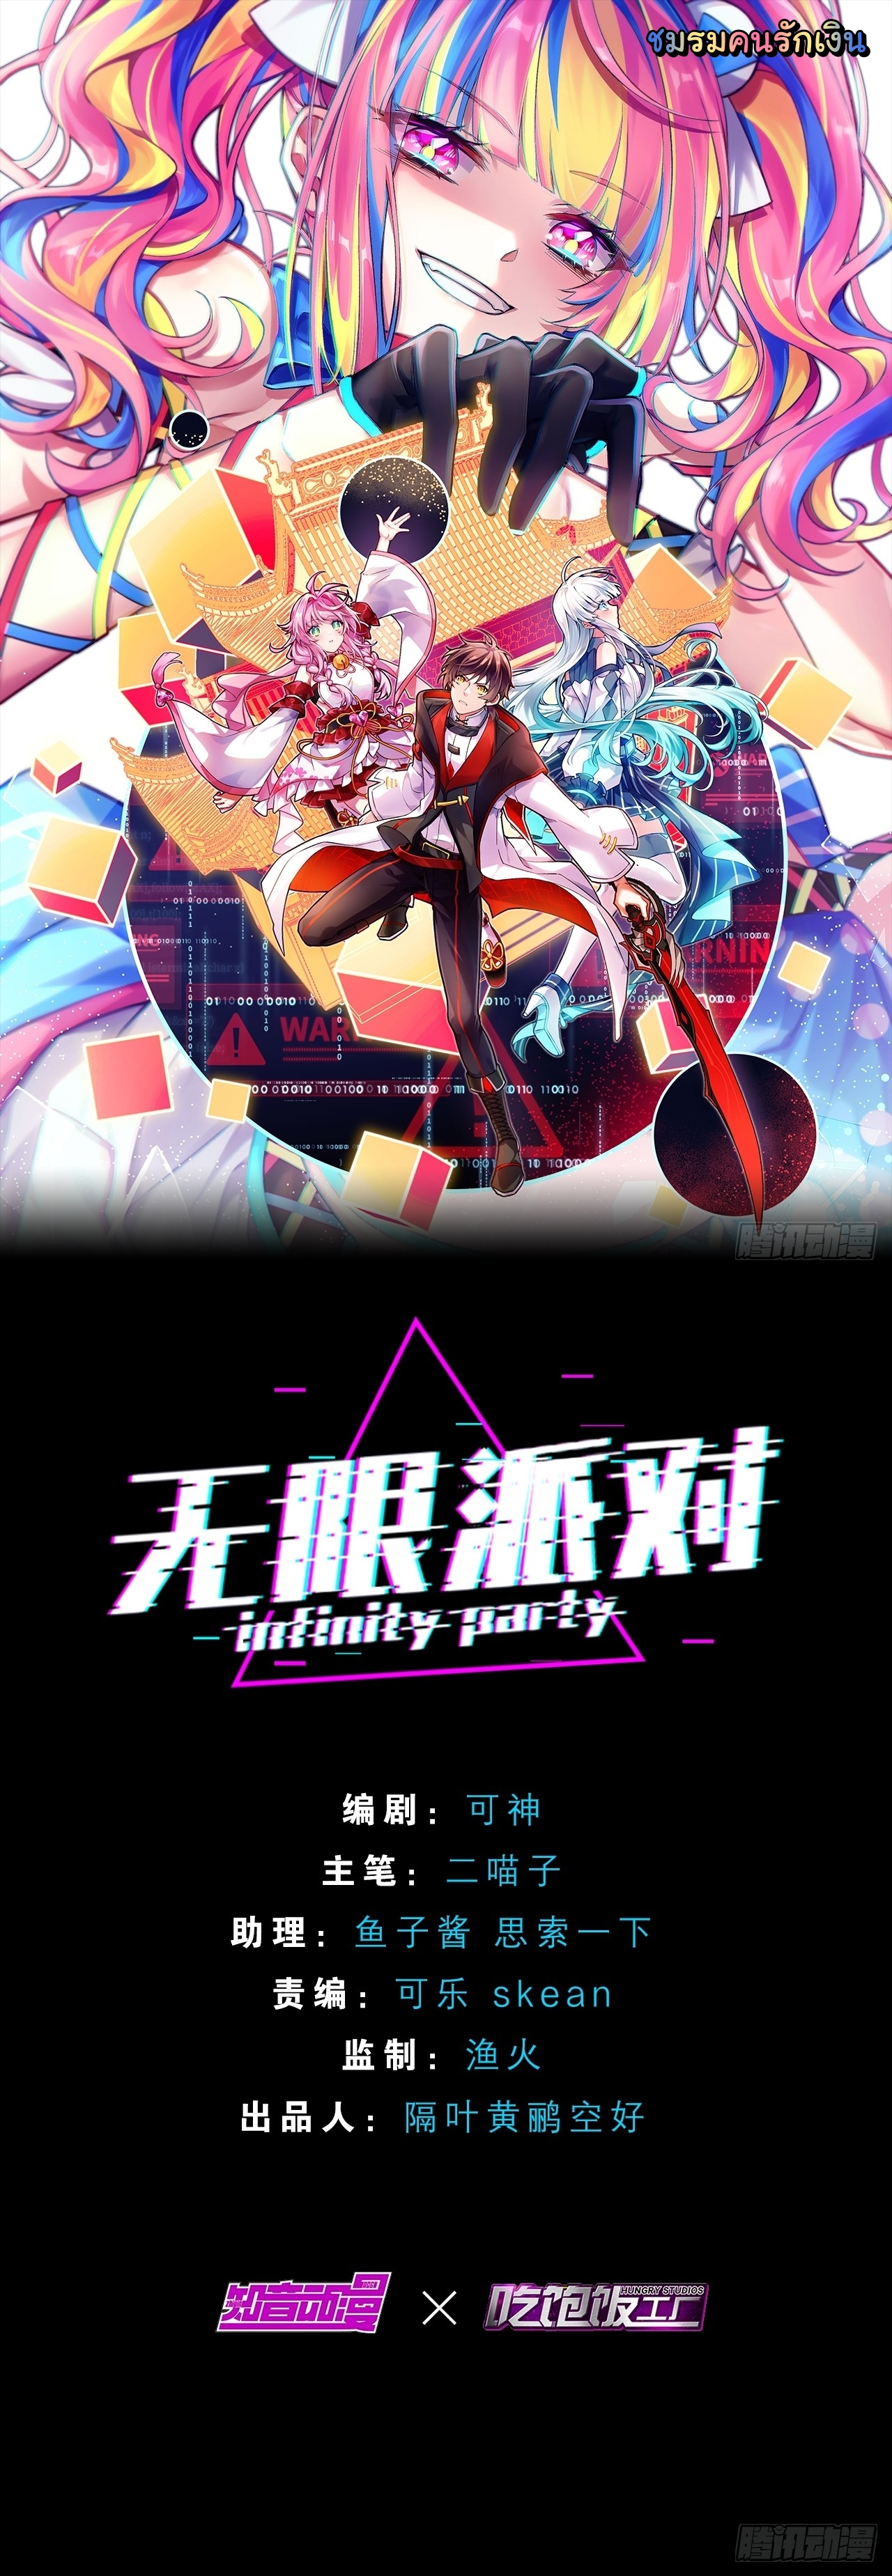 Infinity party 11 (1)